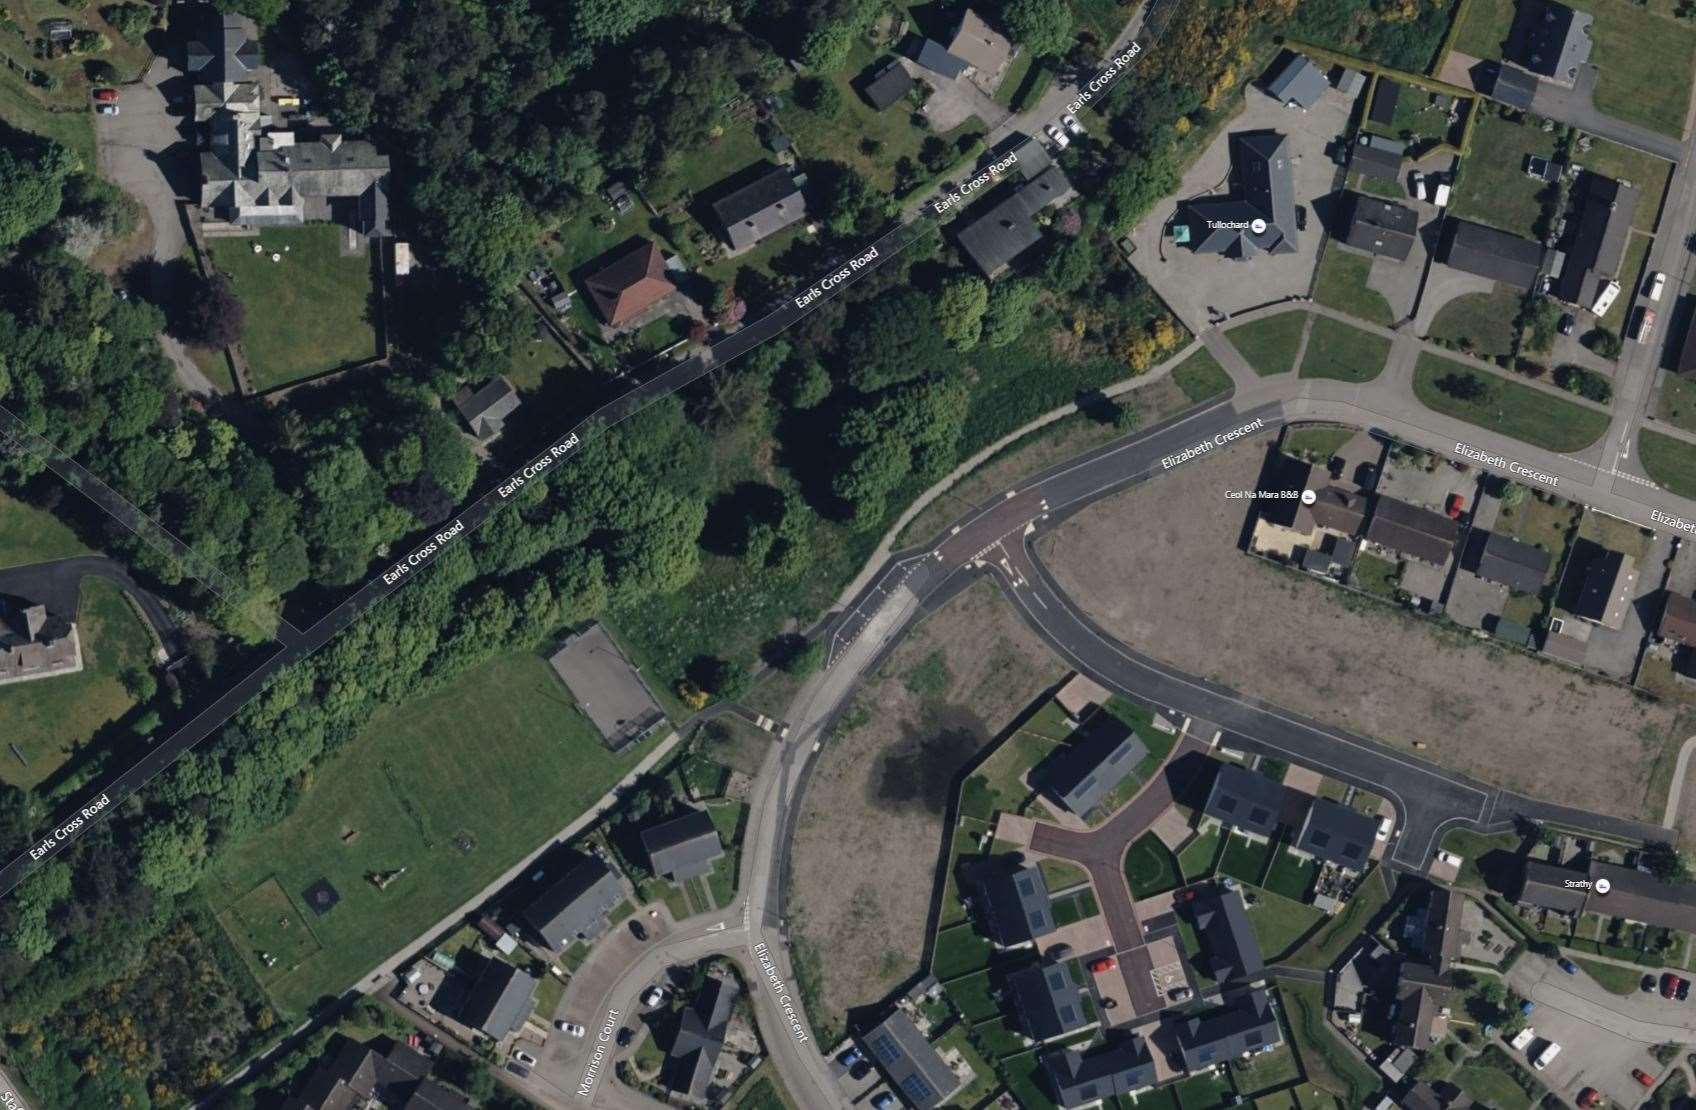 The grey rectangle in this image is the outdoor basketball court and the area of land identified for the building plots is the tree covered land running to the right of it.